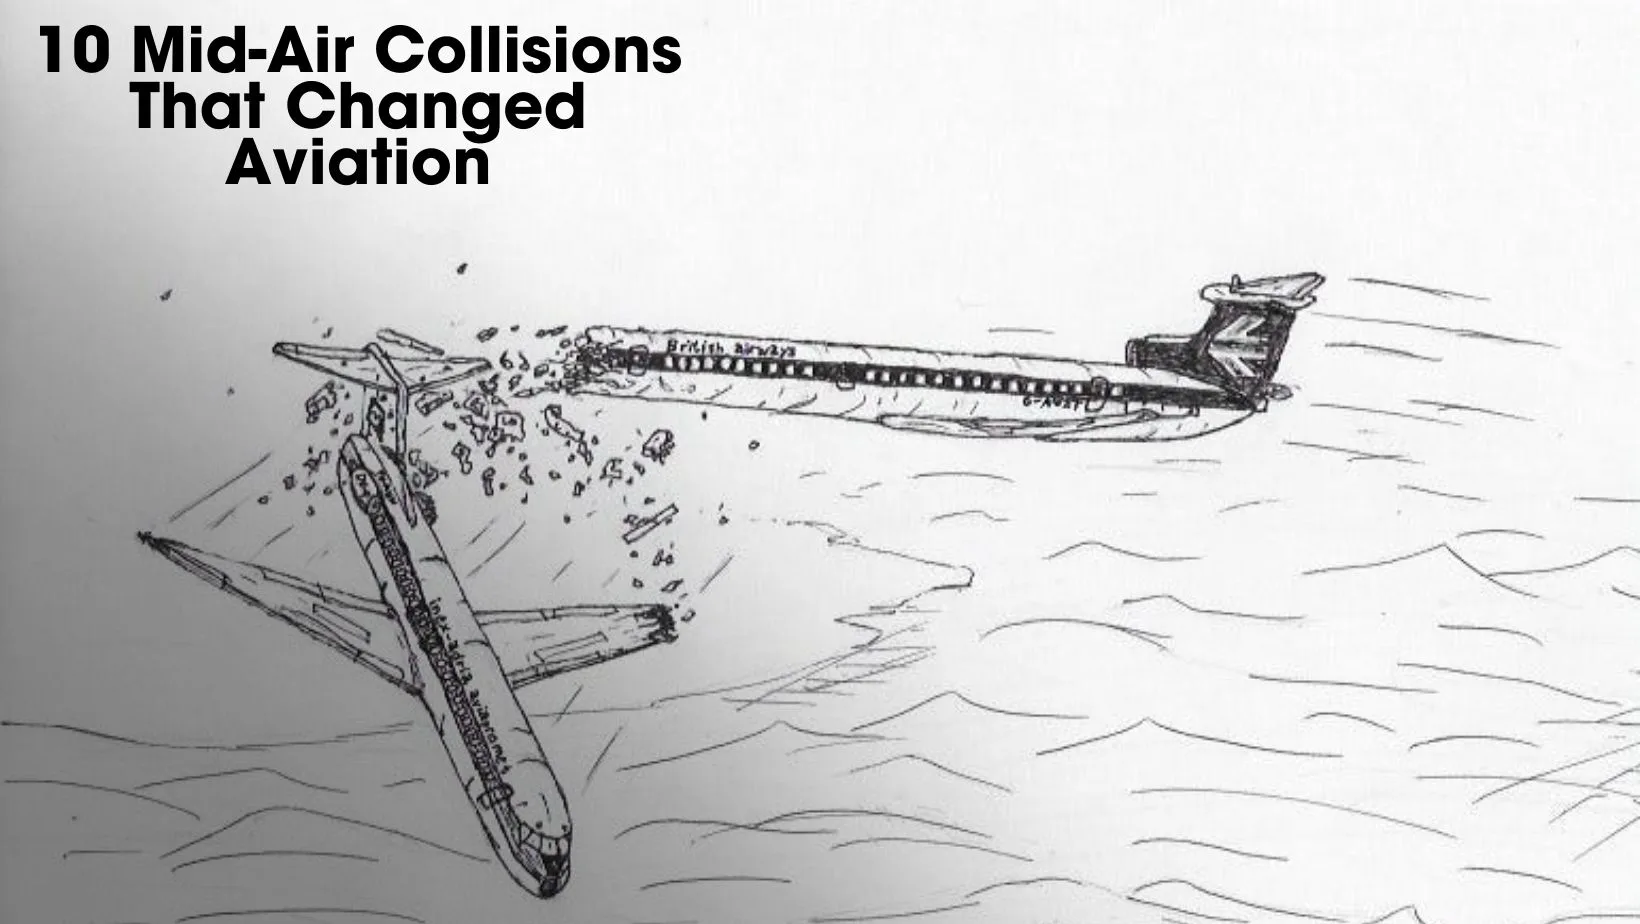 10 Mid-Air Collisions That Changed Aviation